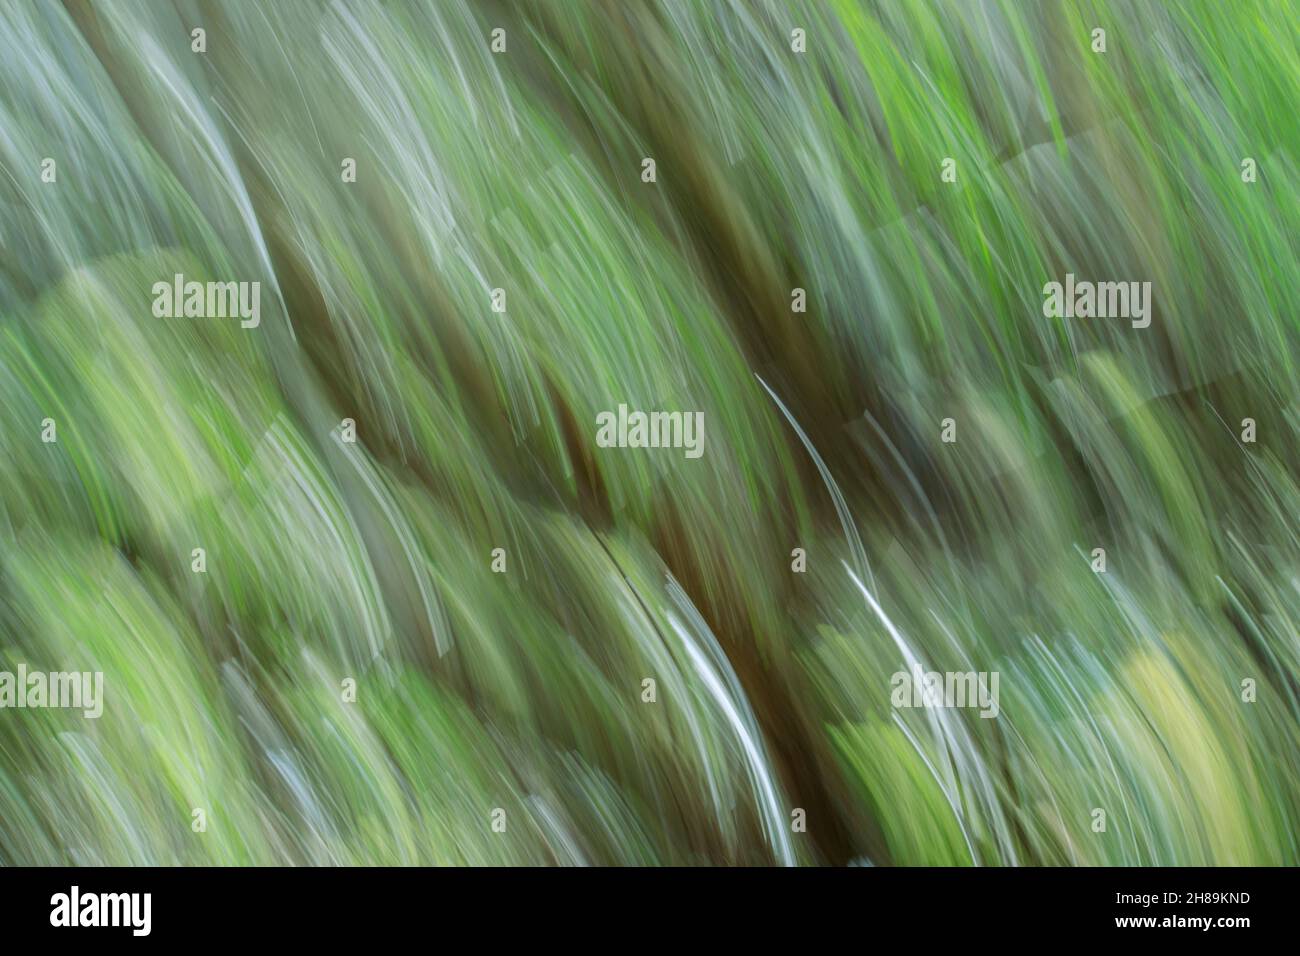 Abstract, soft motion blur in green and brown hues of tree trunks reaching up, made through intentional camera movement. Stock Photo